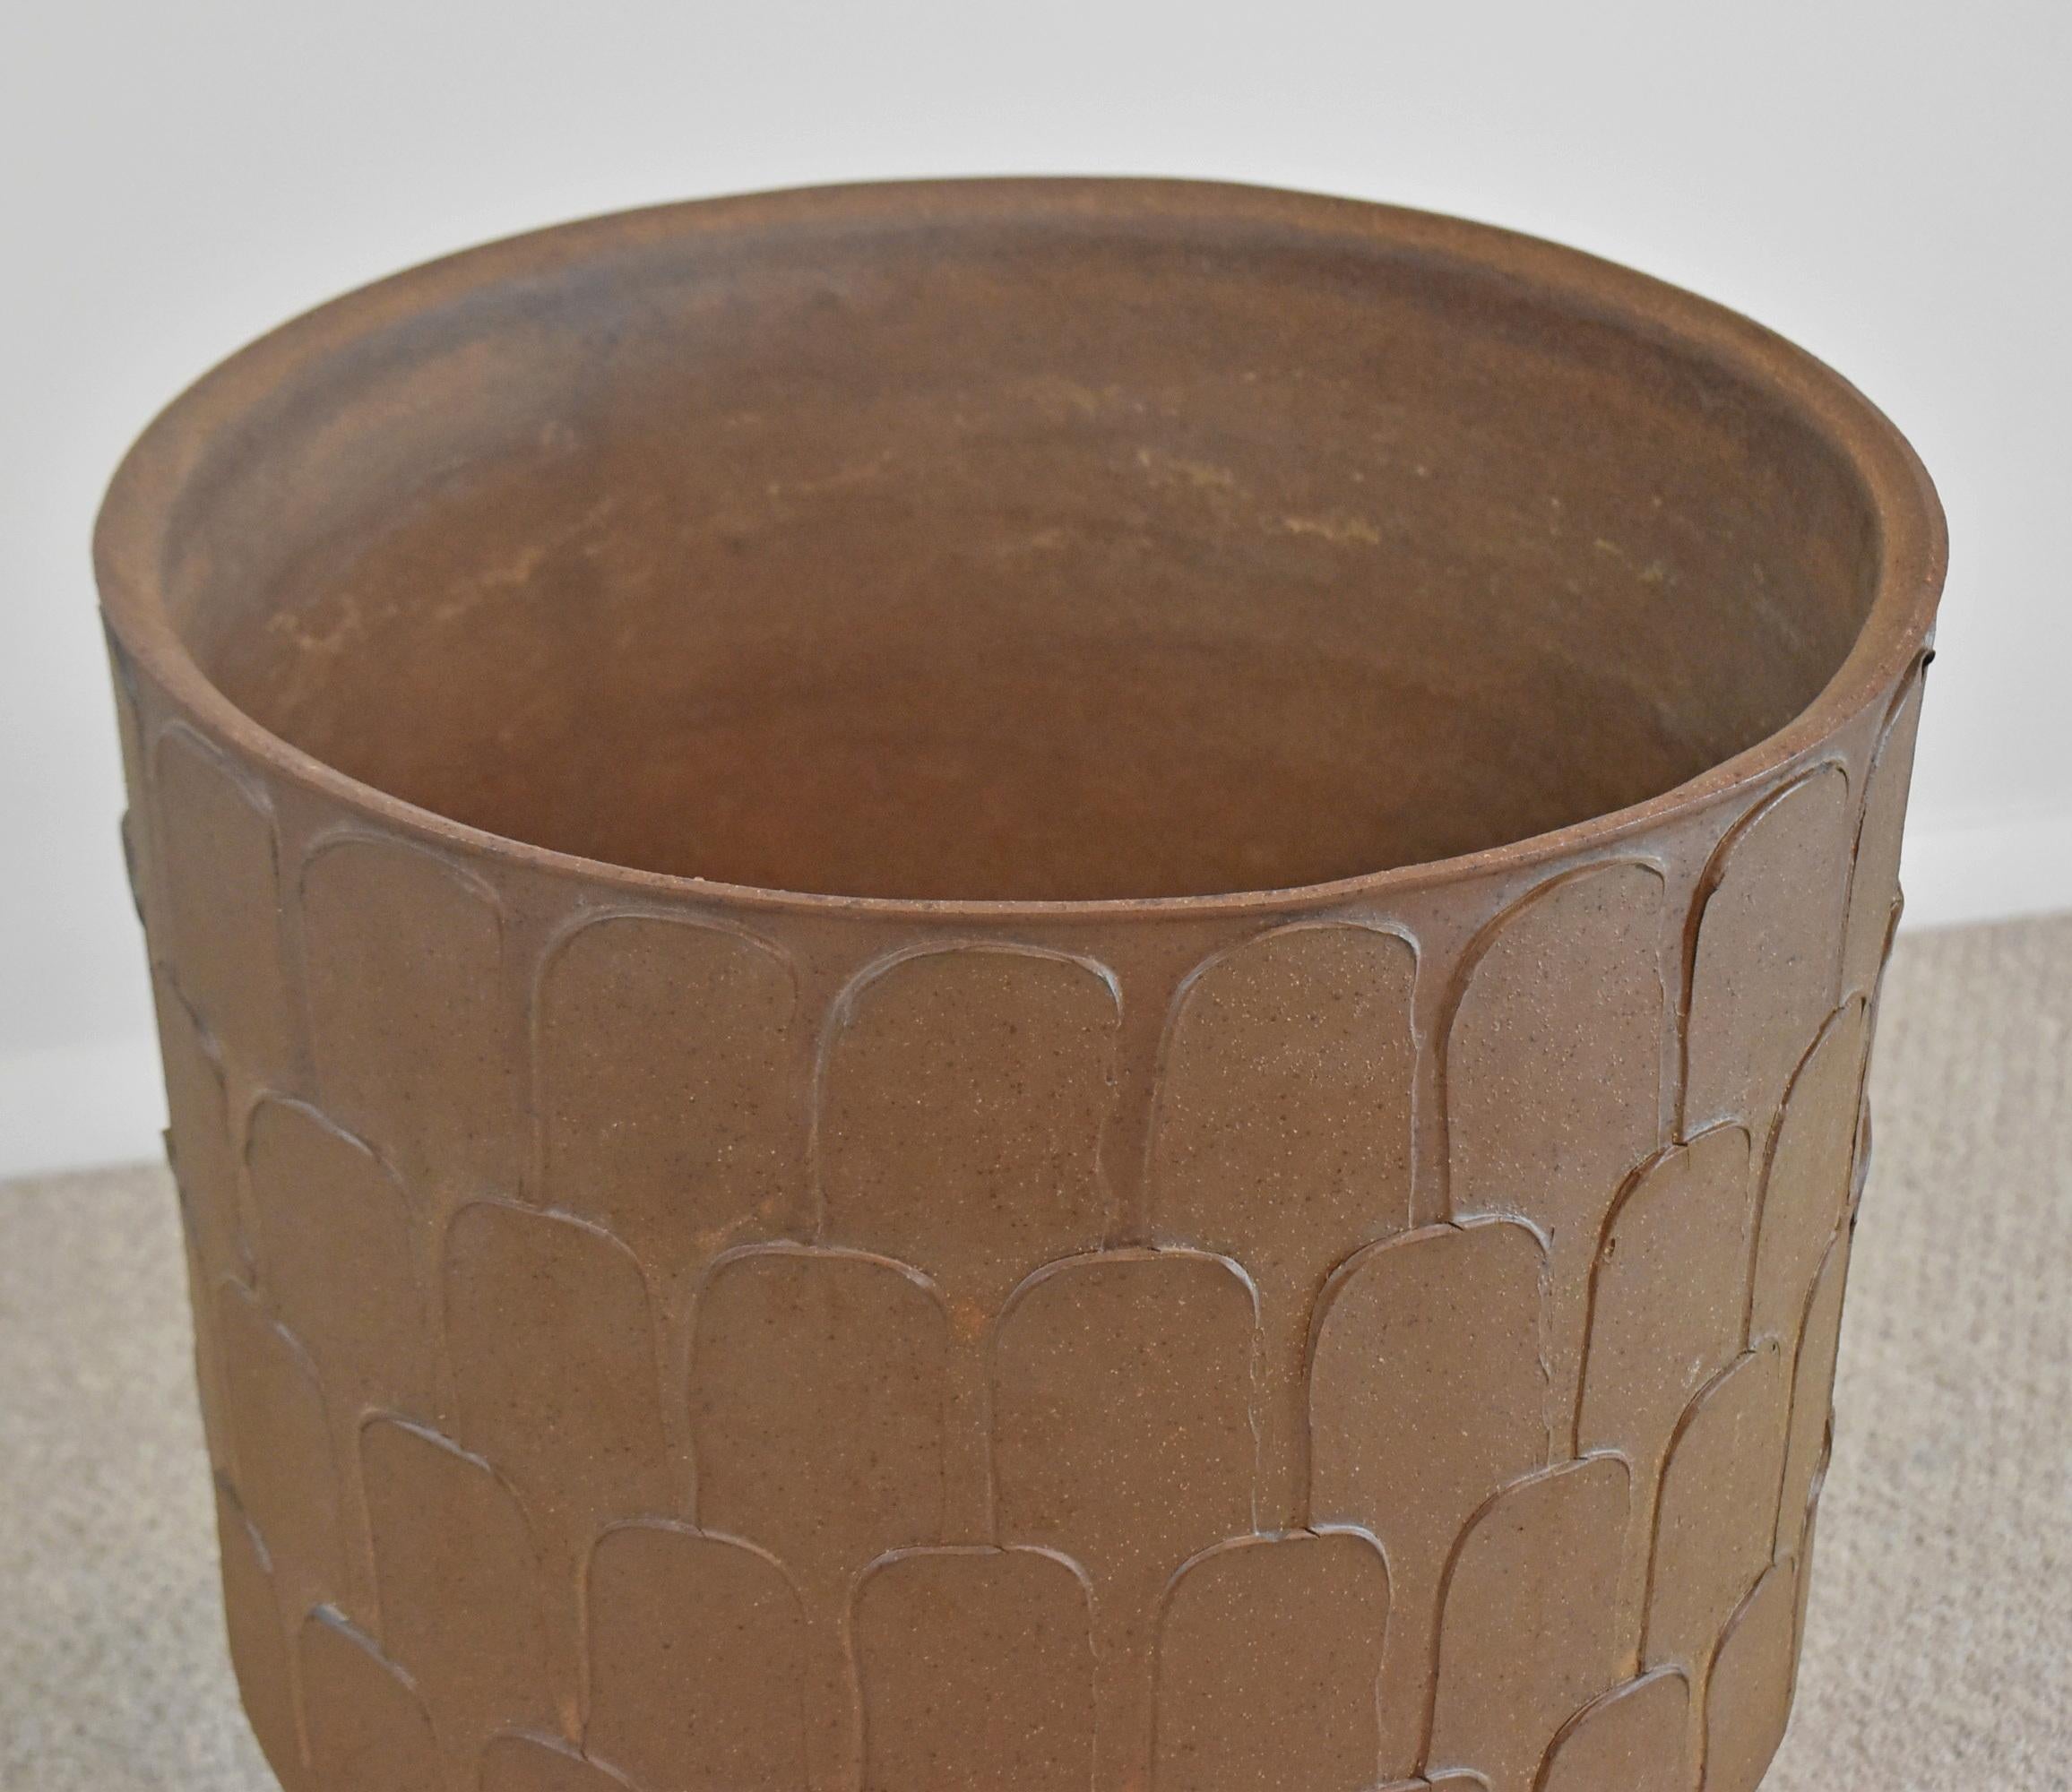 Pedestal floor vase by David Cressey for Architectural Pottery. Circa 1960-1969. Large floor vase leaf pattern with brown glaze and mounted on a circular pedestal by David Cressey (1916-2013). Small chip under the top lip not visible from the top as